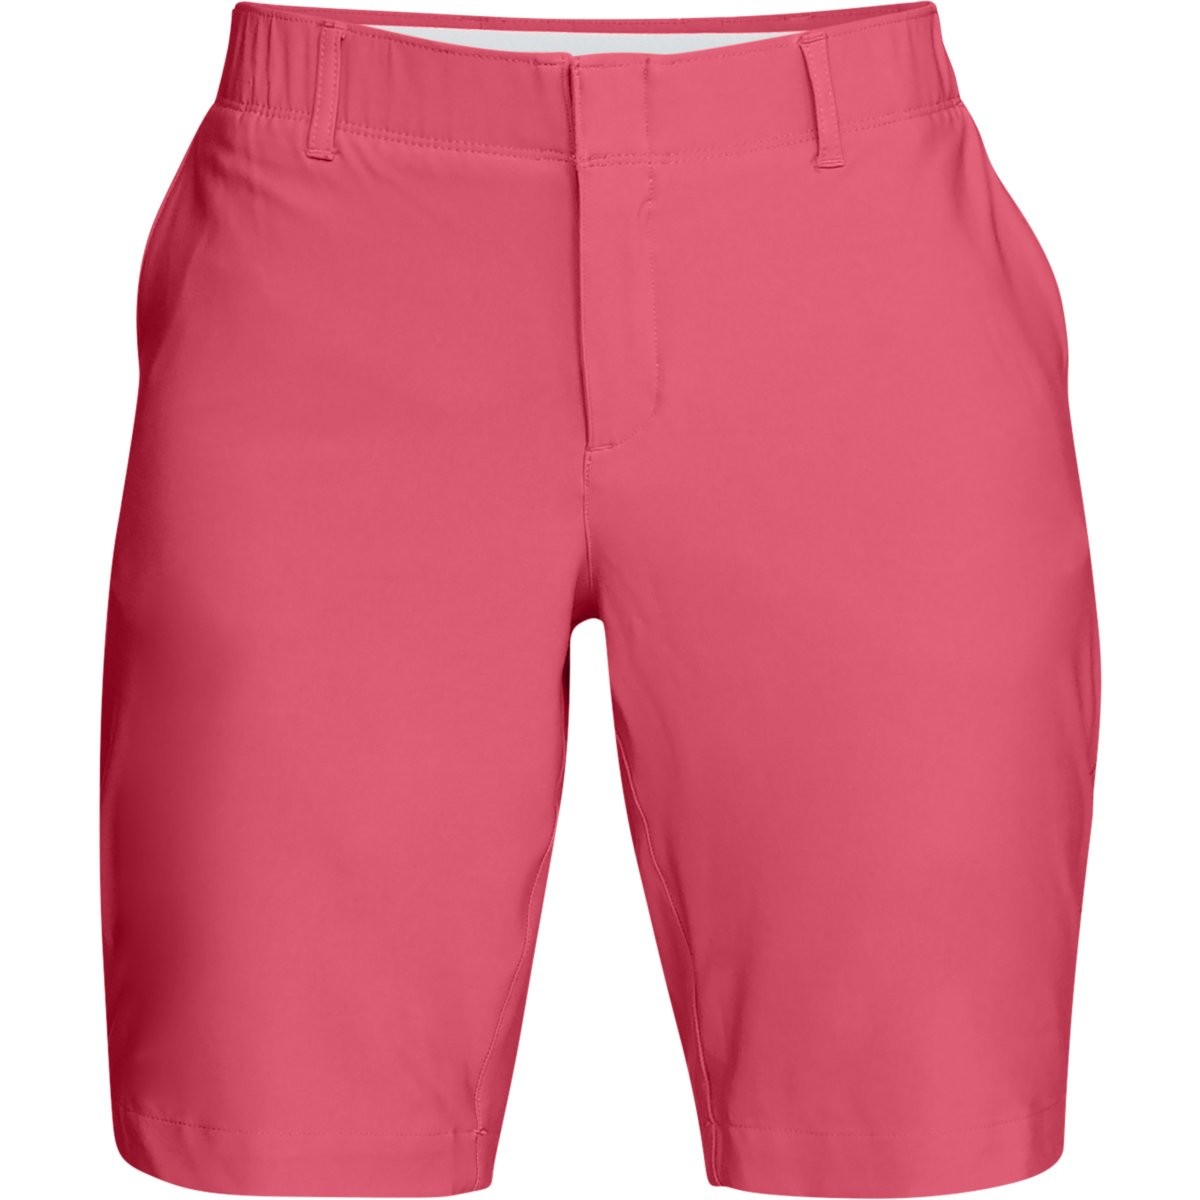 Under Armour Links Short Pink